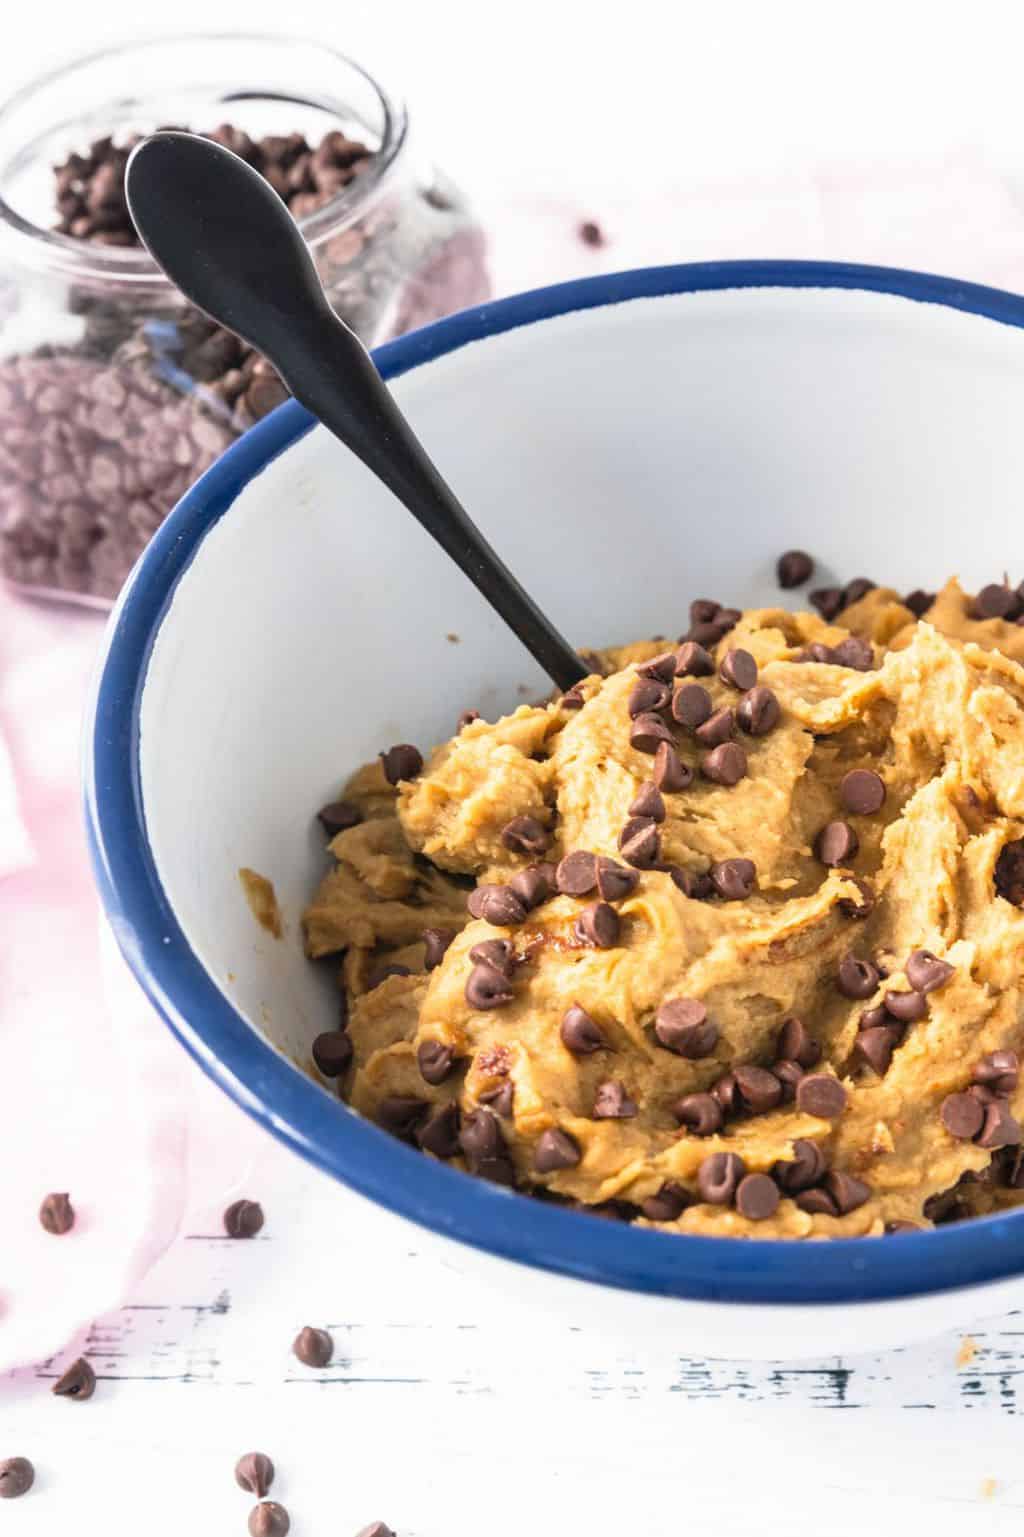 Mixed Chickpea Cookie Dough with Chocolate chips by Sugar and Cloth